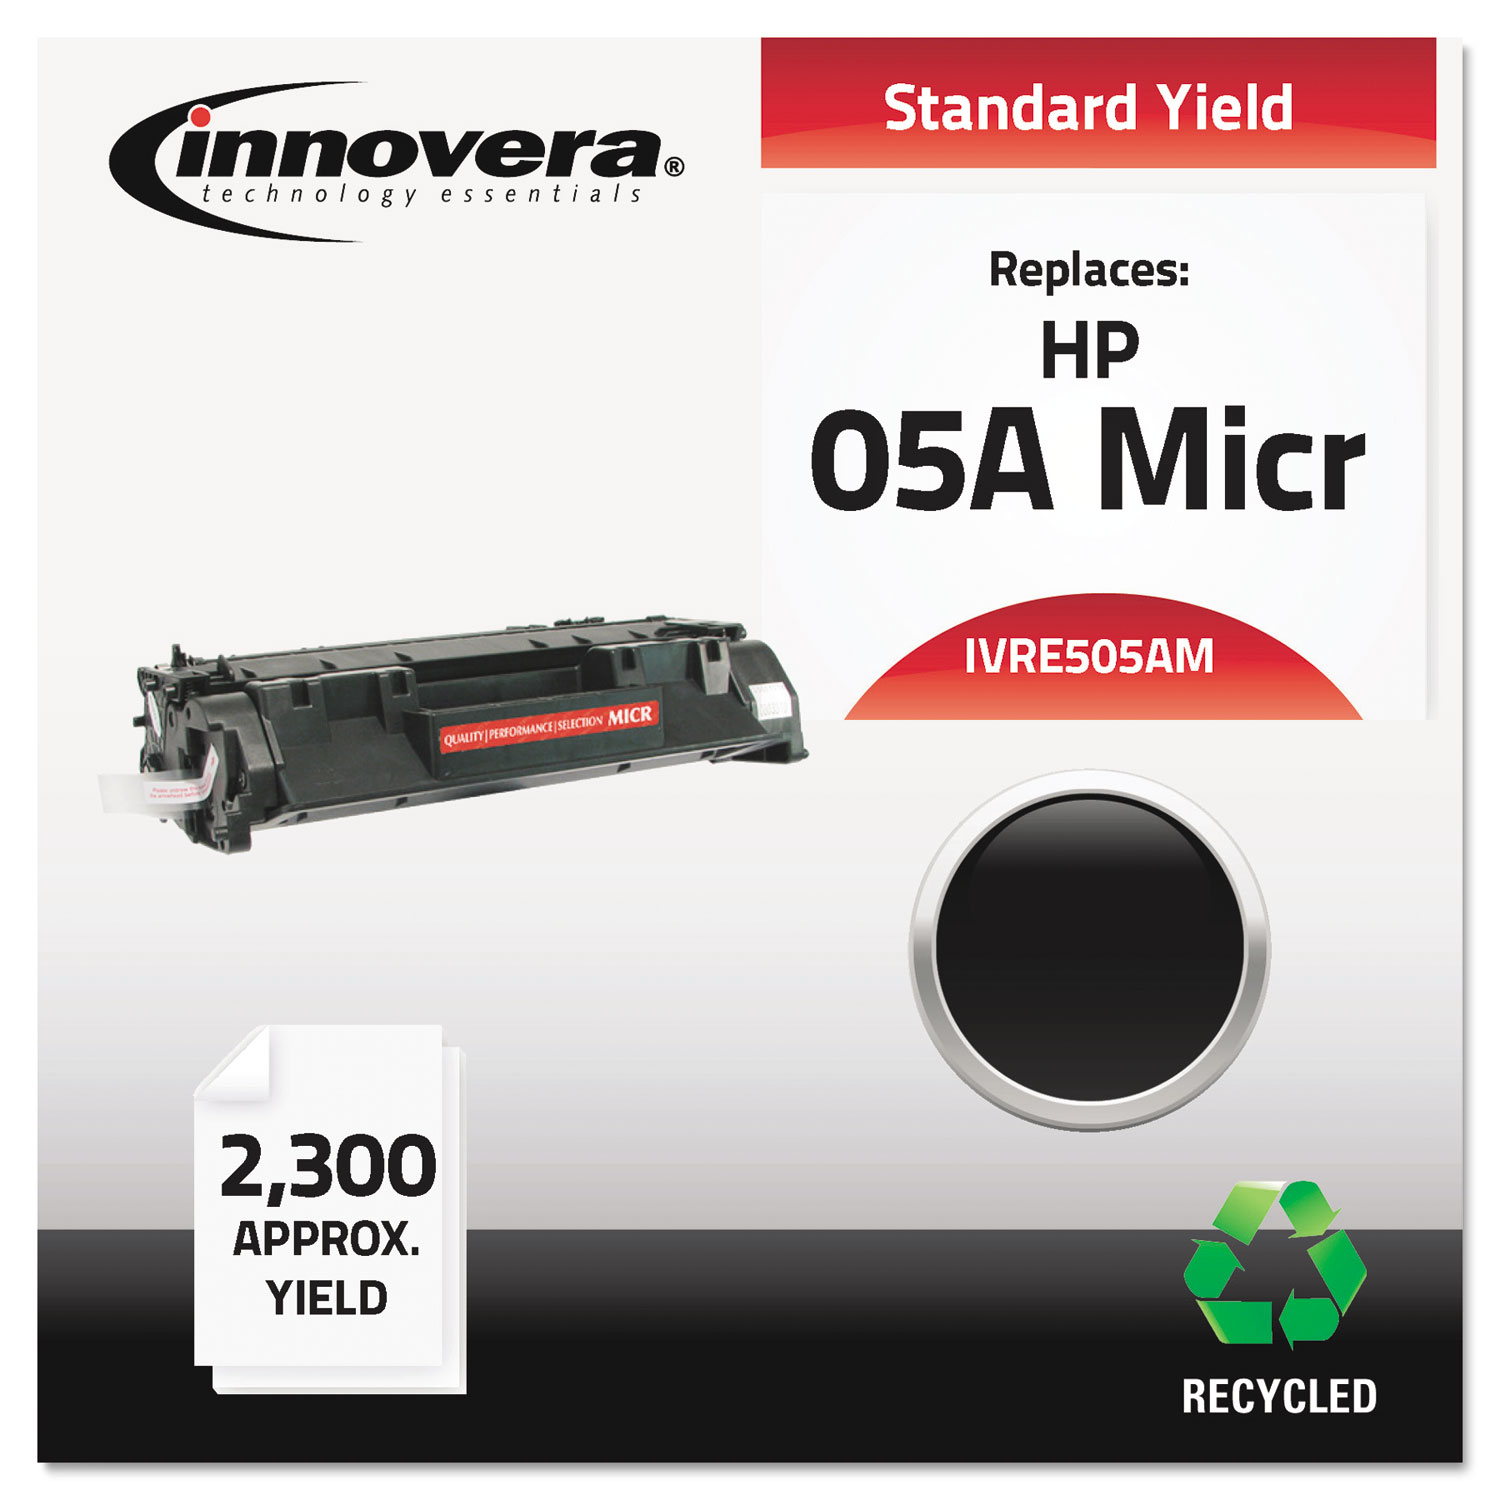 Remanufactured CE505A(M) (05AM) MICR Toner, 2300 Page-Yield, Black